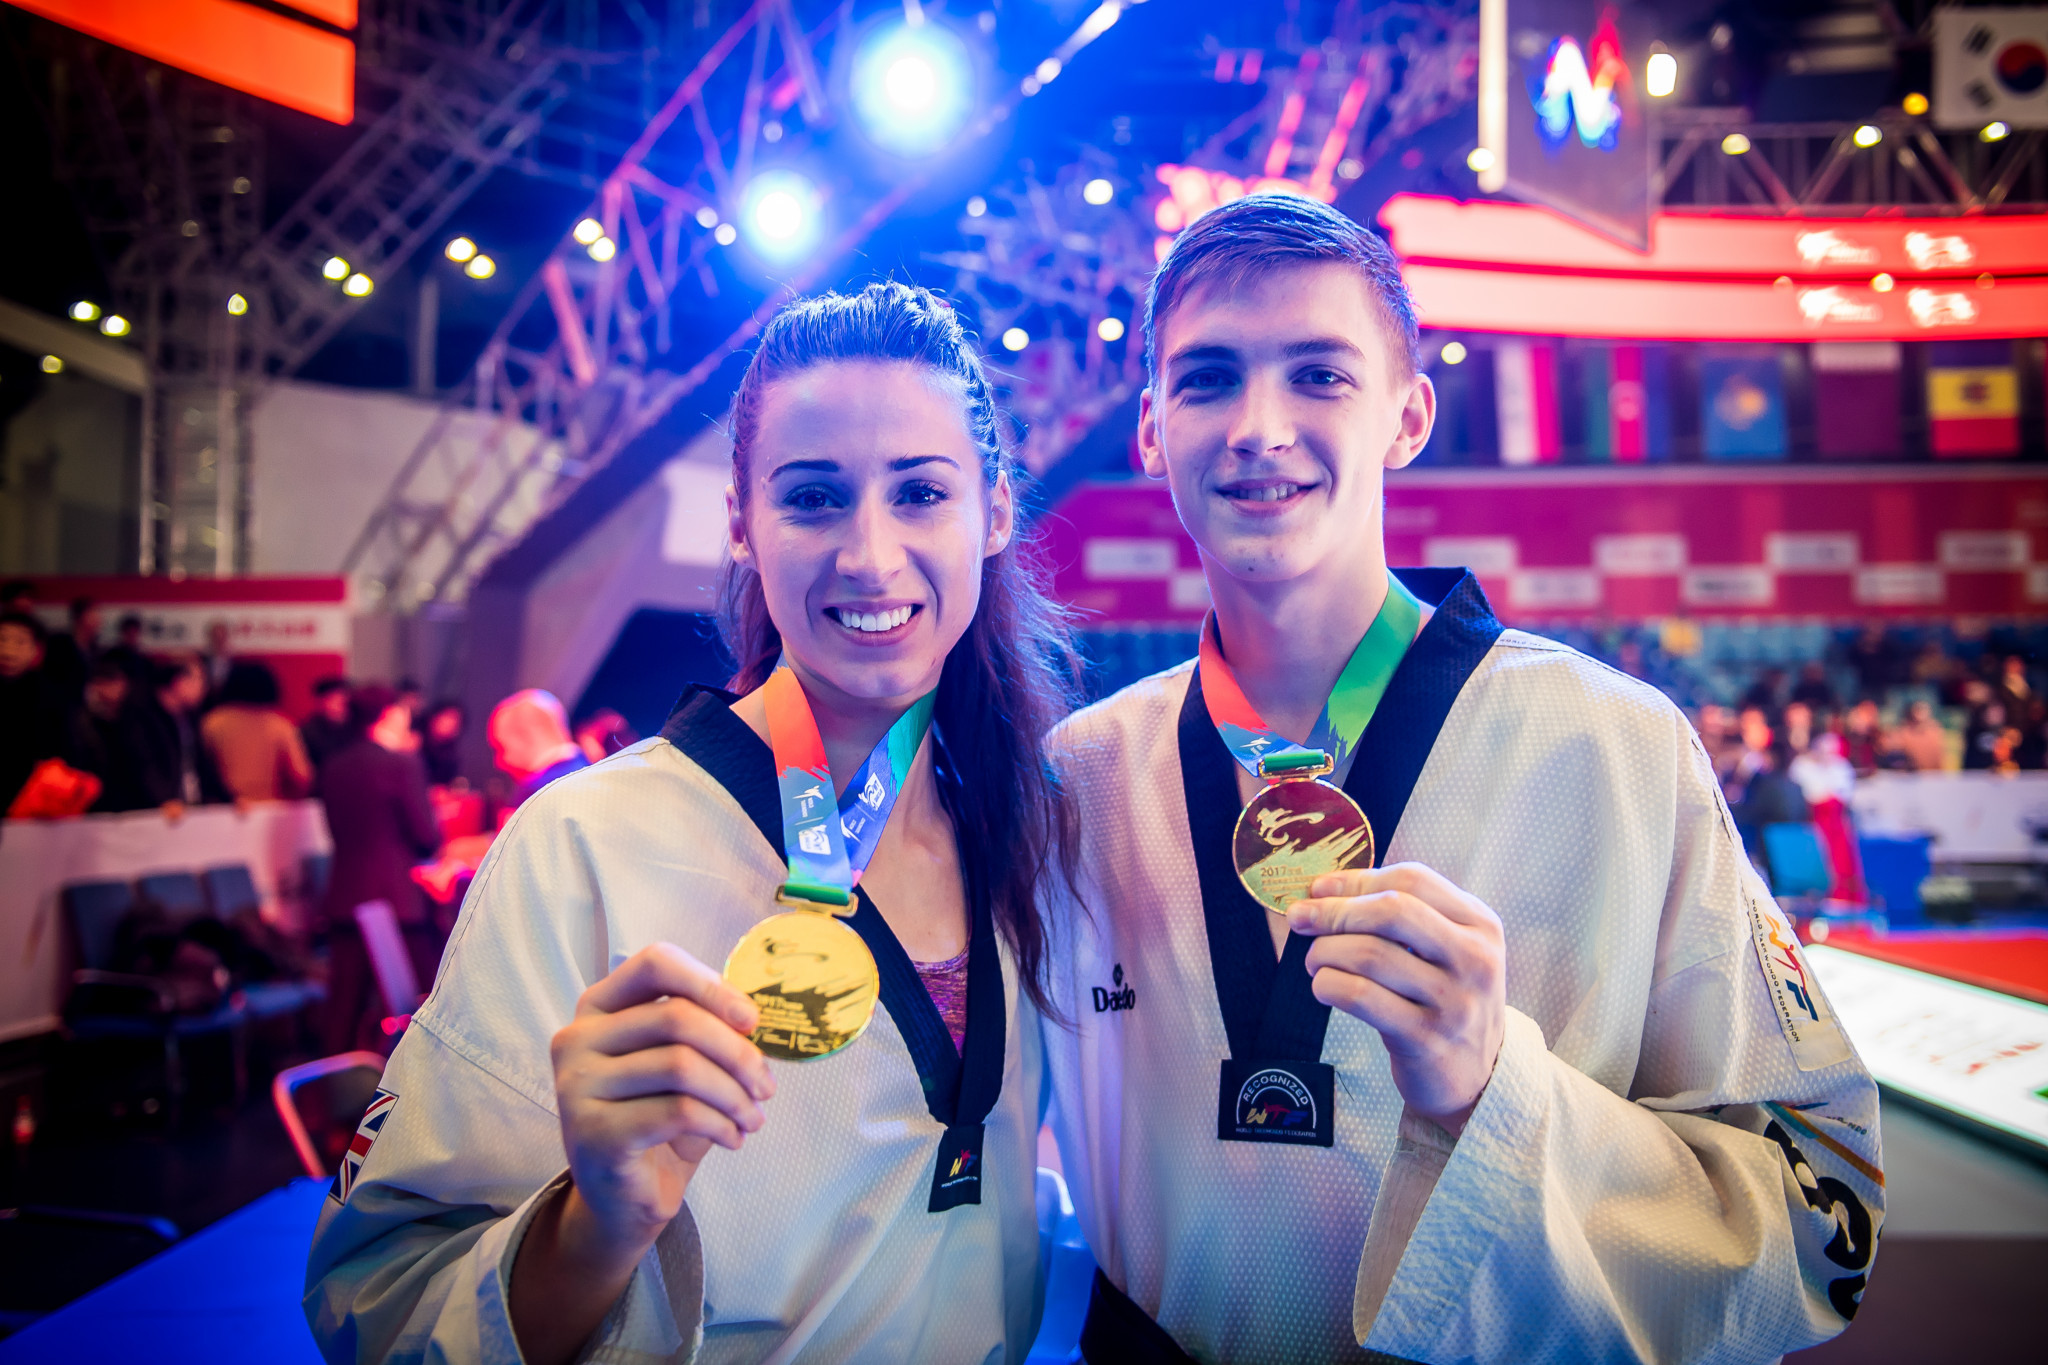 Great Britain's Bianca Walkden and Russia's Maksim Khramtcov won the respective women's over 67 kilograms and men's under 80kg gold medals at the inaugural event of the World Taekwondo Grand Slam Champions Series in Chinese city Wuxi ©World Taekwondo